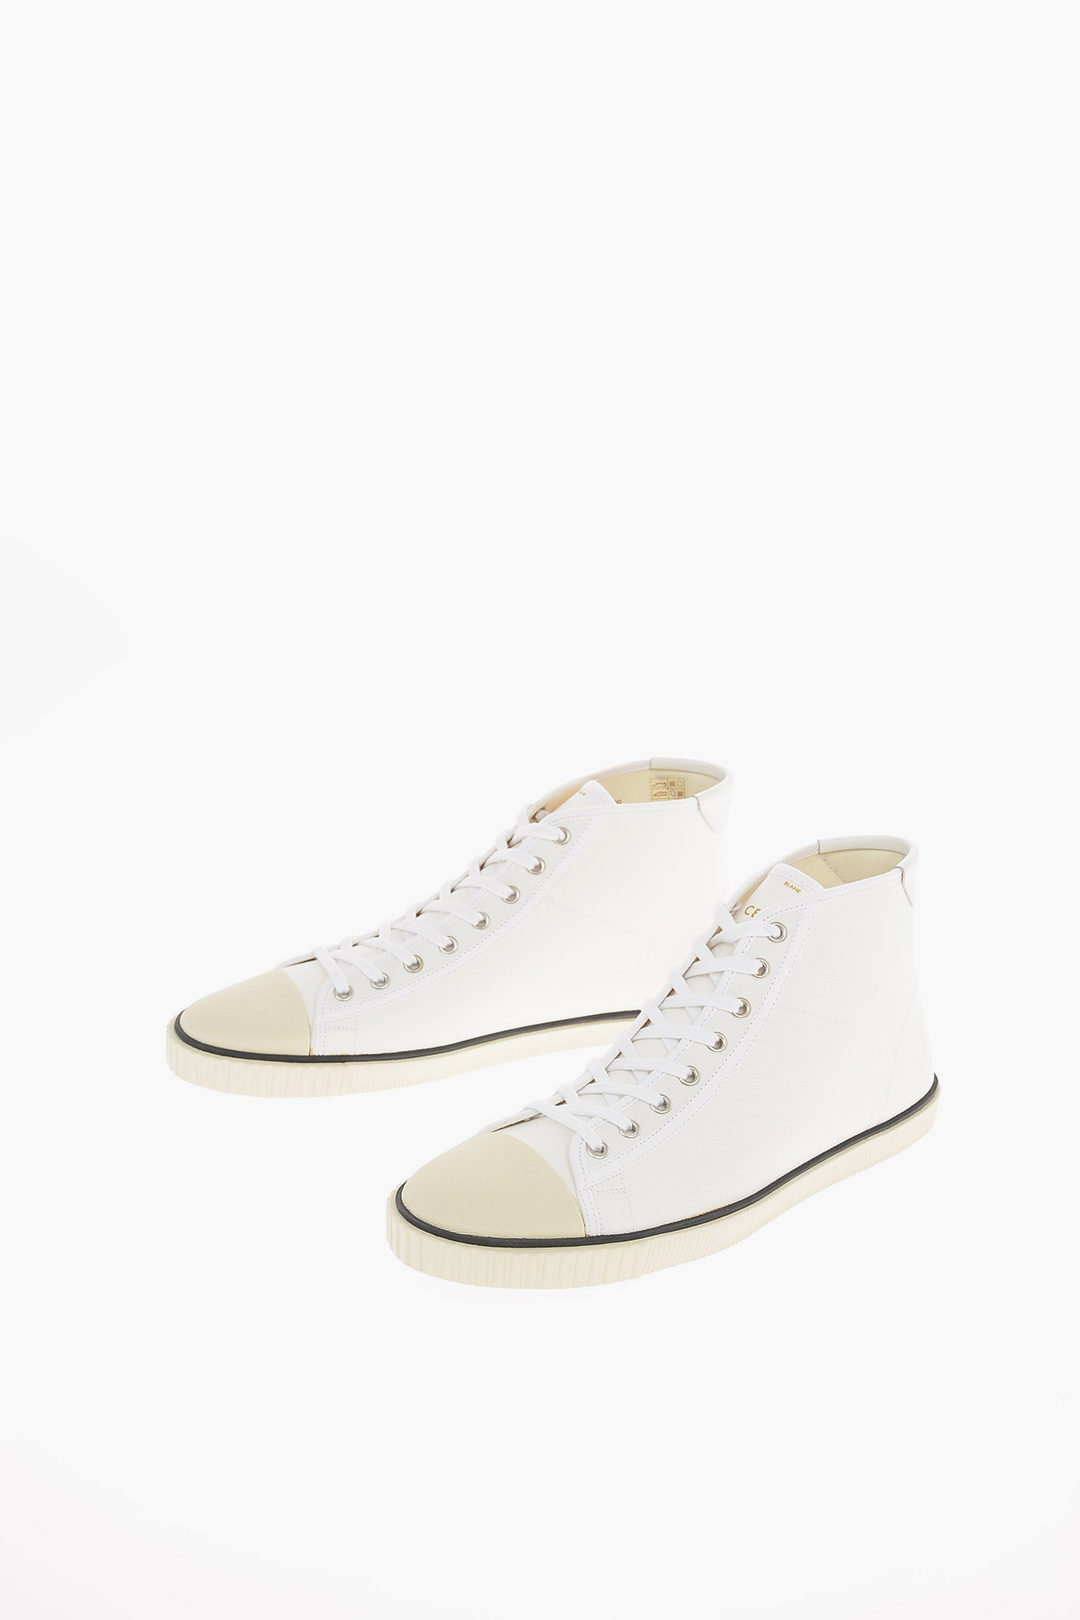 Celine Fabric BLANK High Top Sneakers men - Glamood Outlet